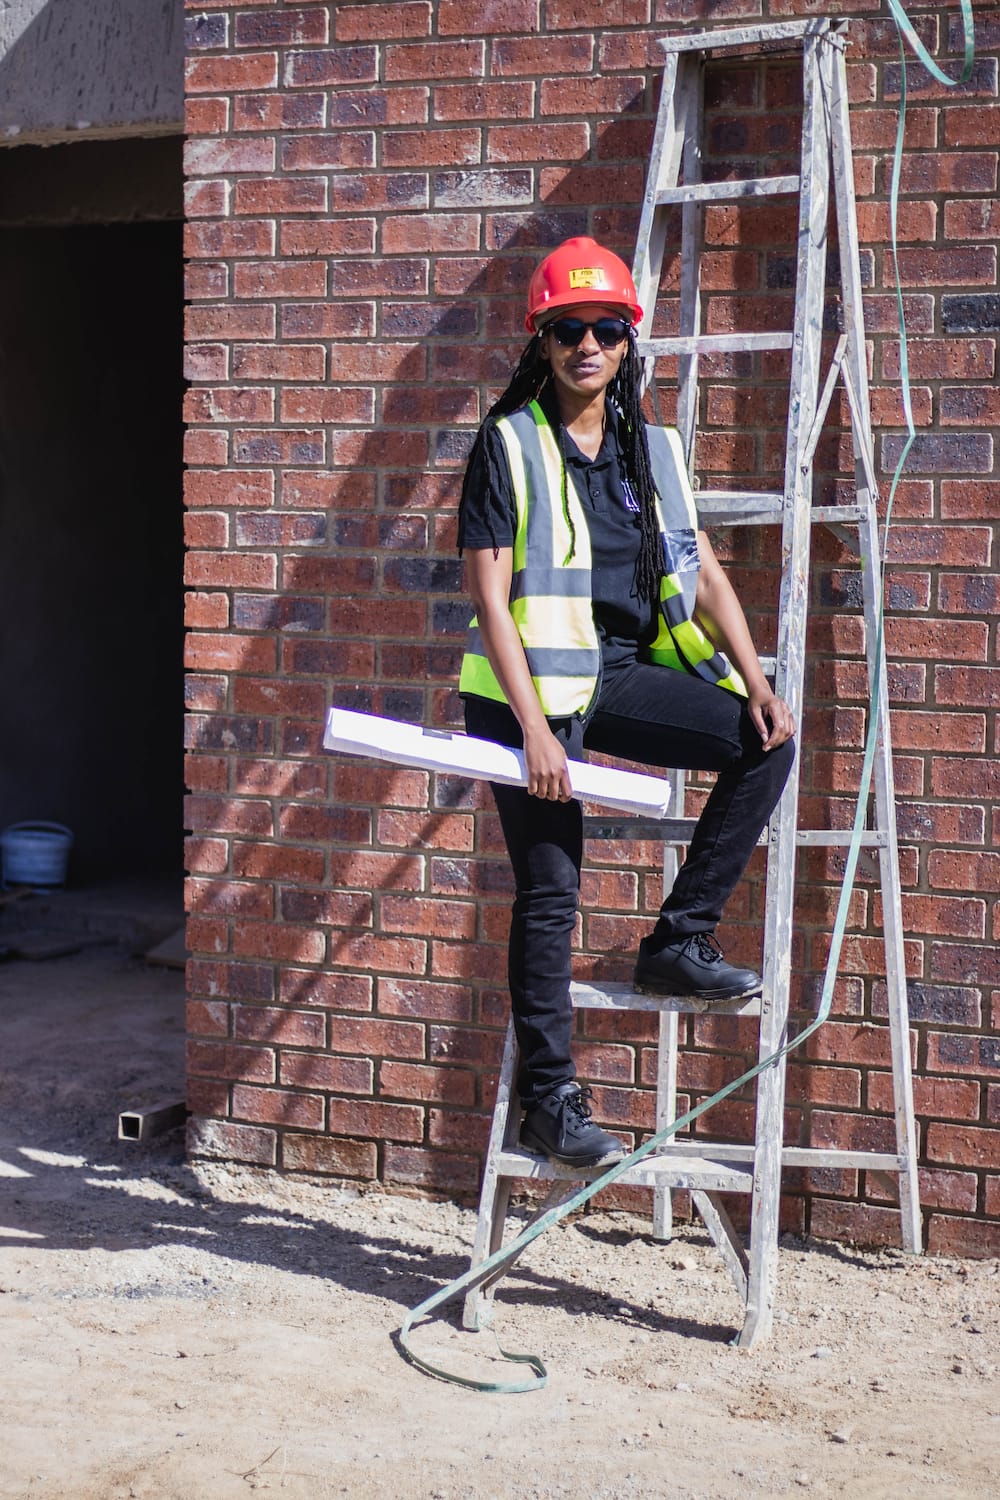 Neo Mdaka gives us a glimpse into what her life is like when she is on site.